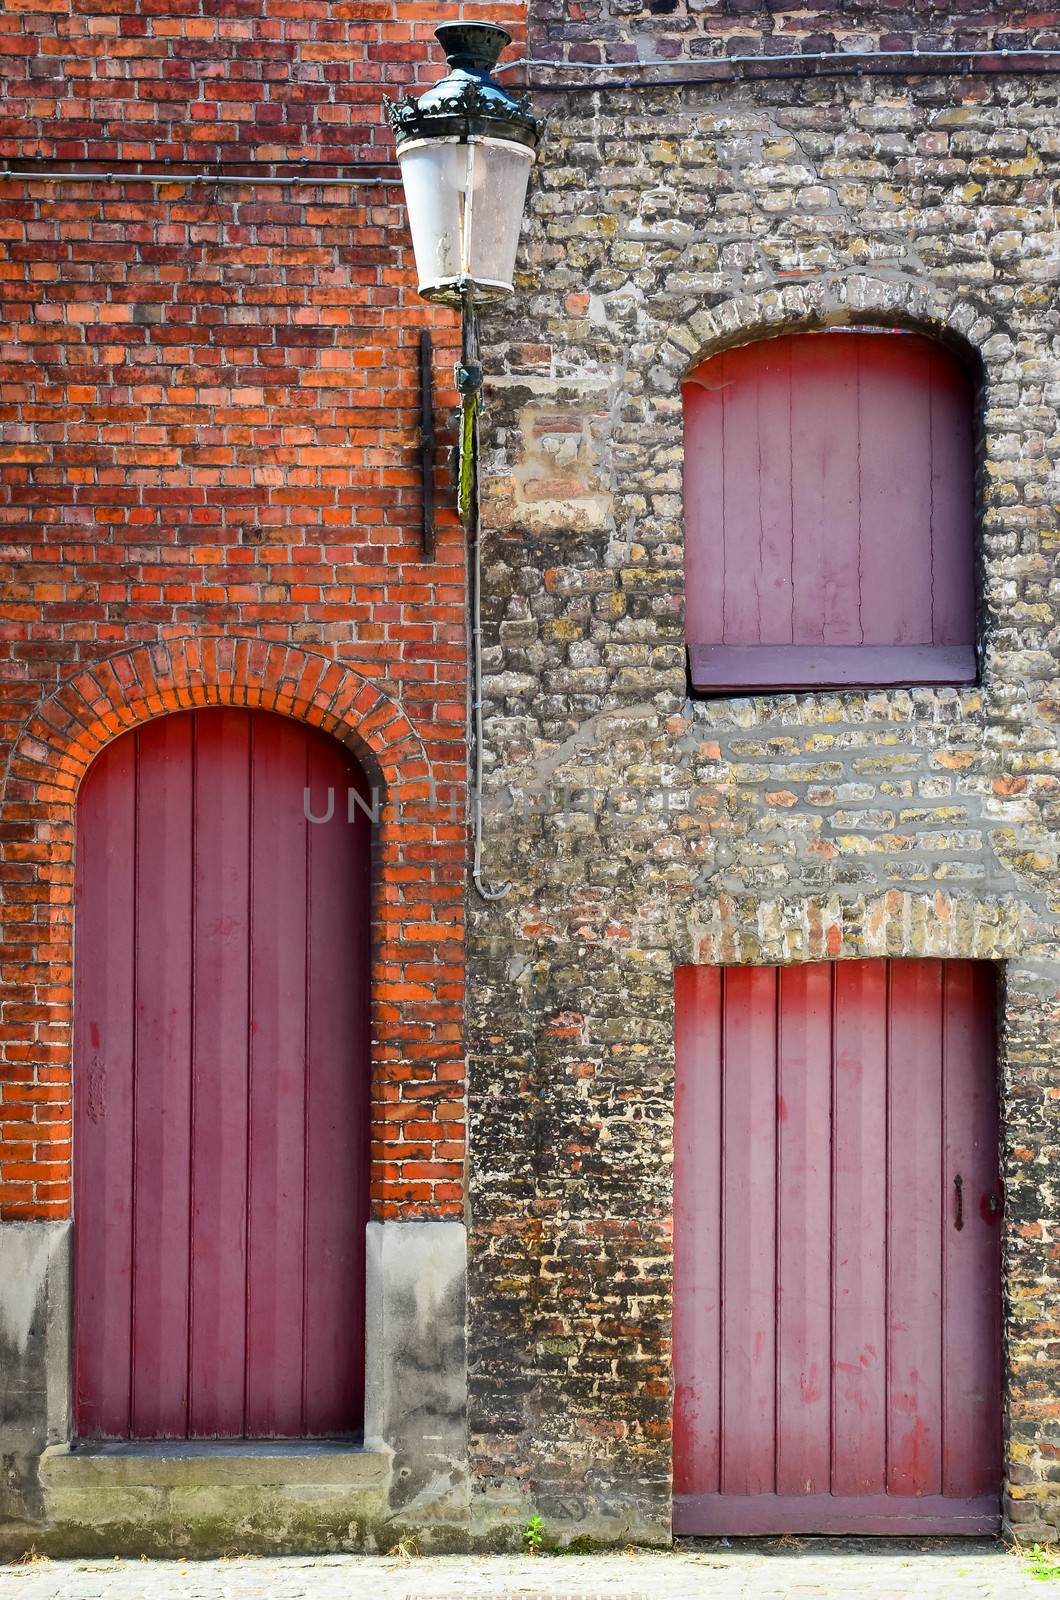 Detail of old vintage brick wall with red wooden doors and windows